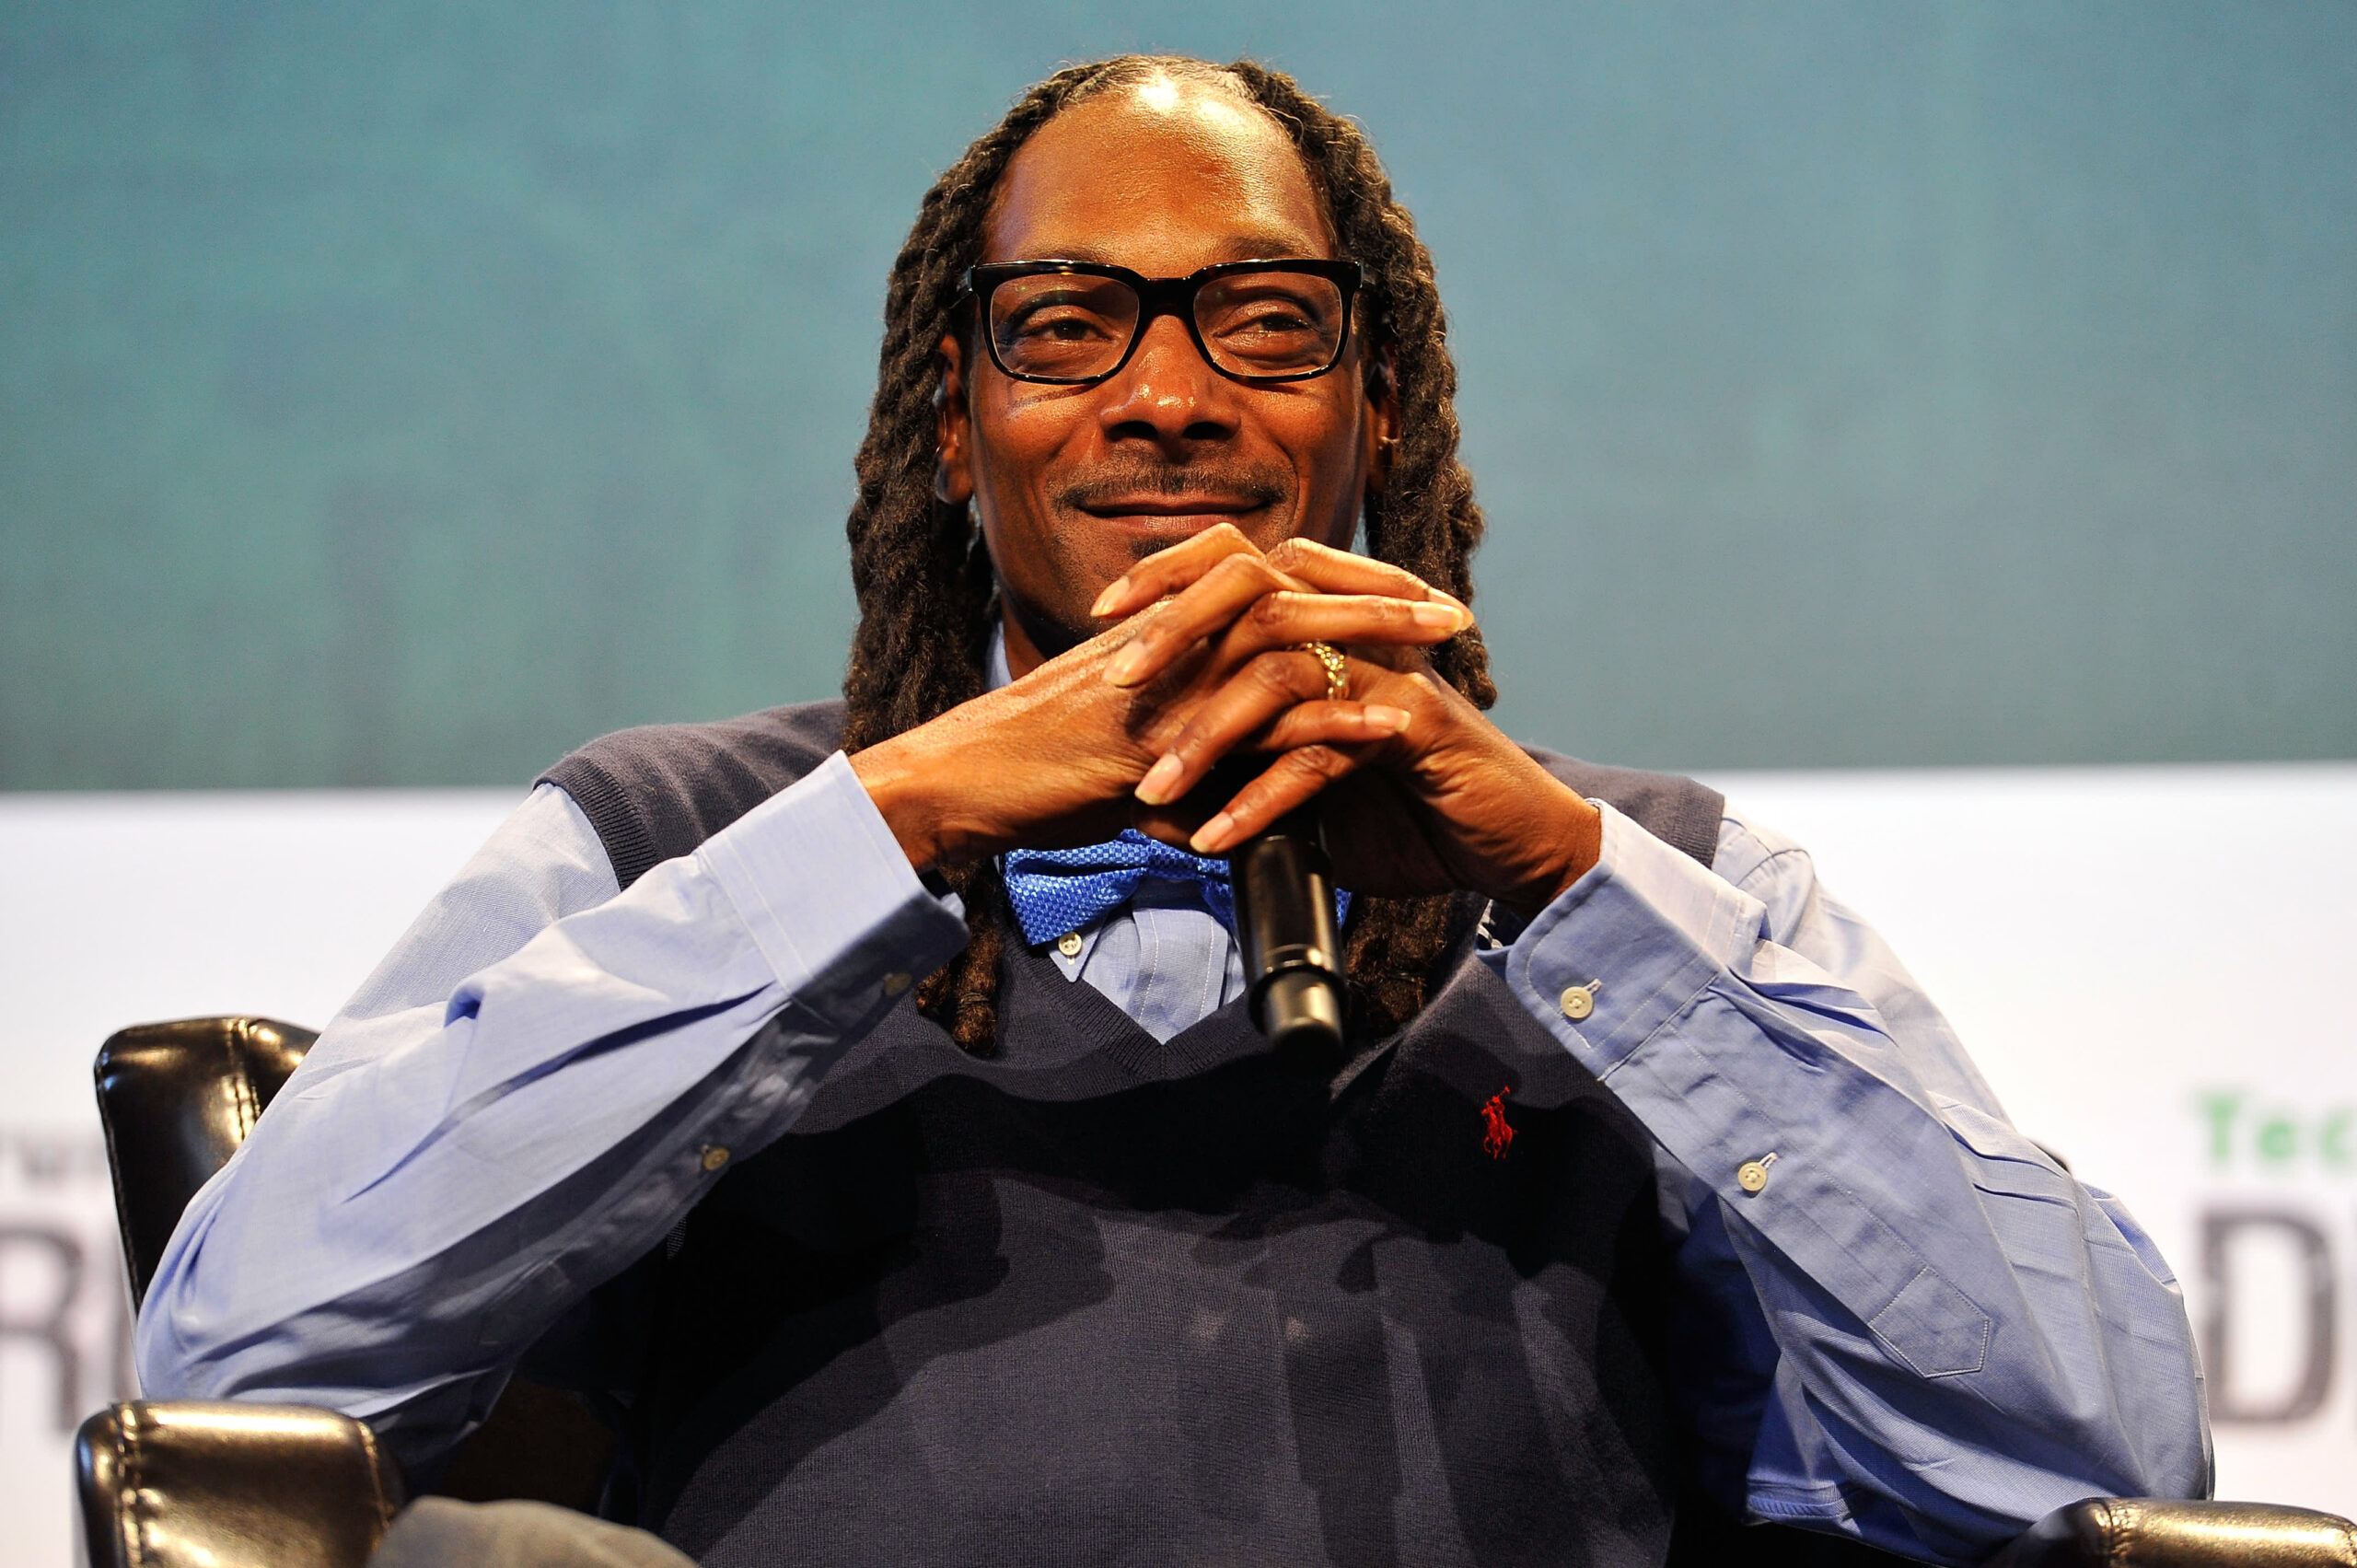 Medical hashish agency backed by Snoop Dogg begins buying and selling in London